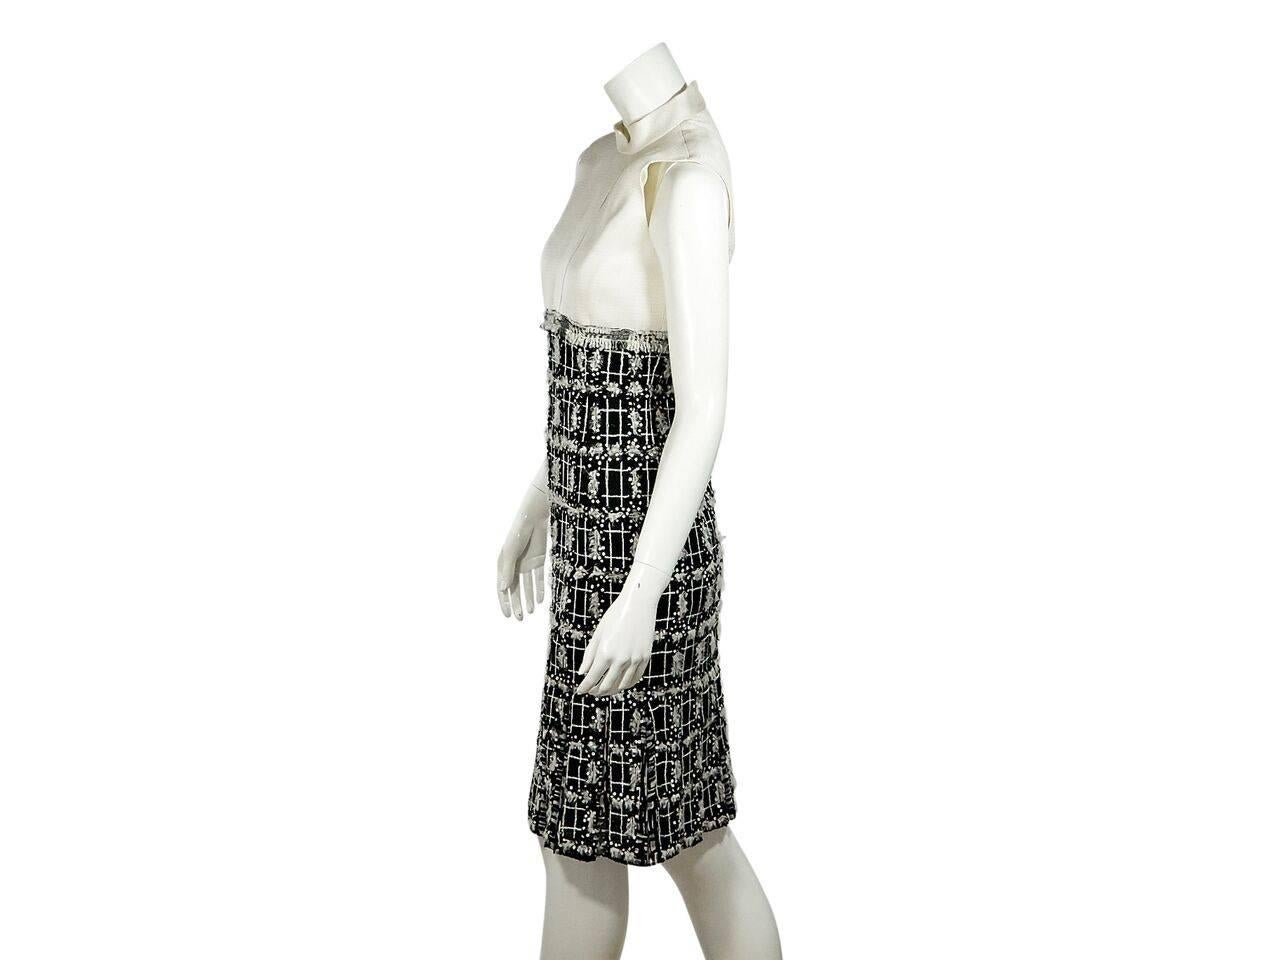 Product details:  Black and cream sheath dress by Oscar de la Renta.  Stand collar.  Sleeveless.  Concealed back zip closure.  Embellished boucle skirting.  
Condition: Pre-owned. Very good.
Est. Retail $ 1,198.00